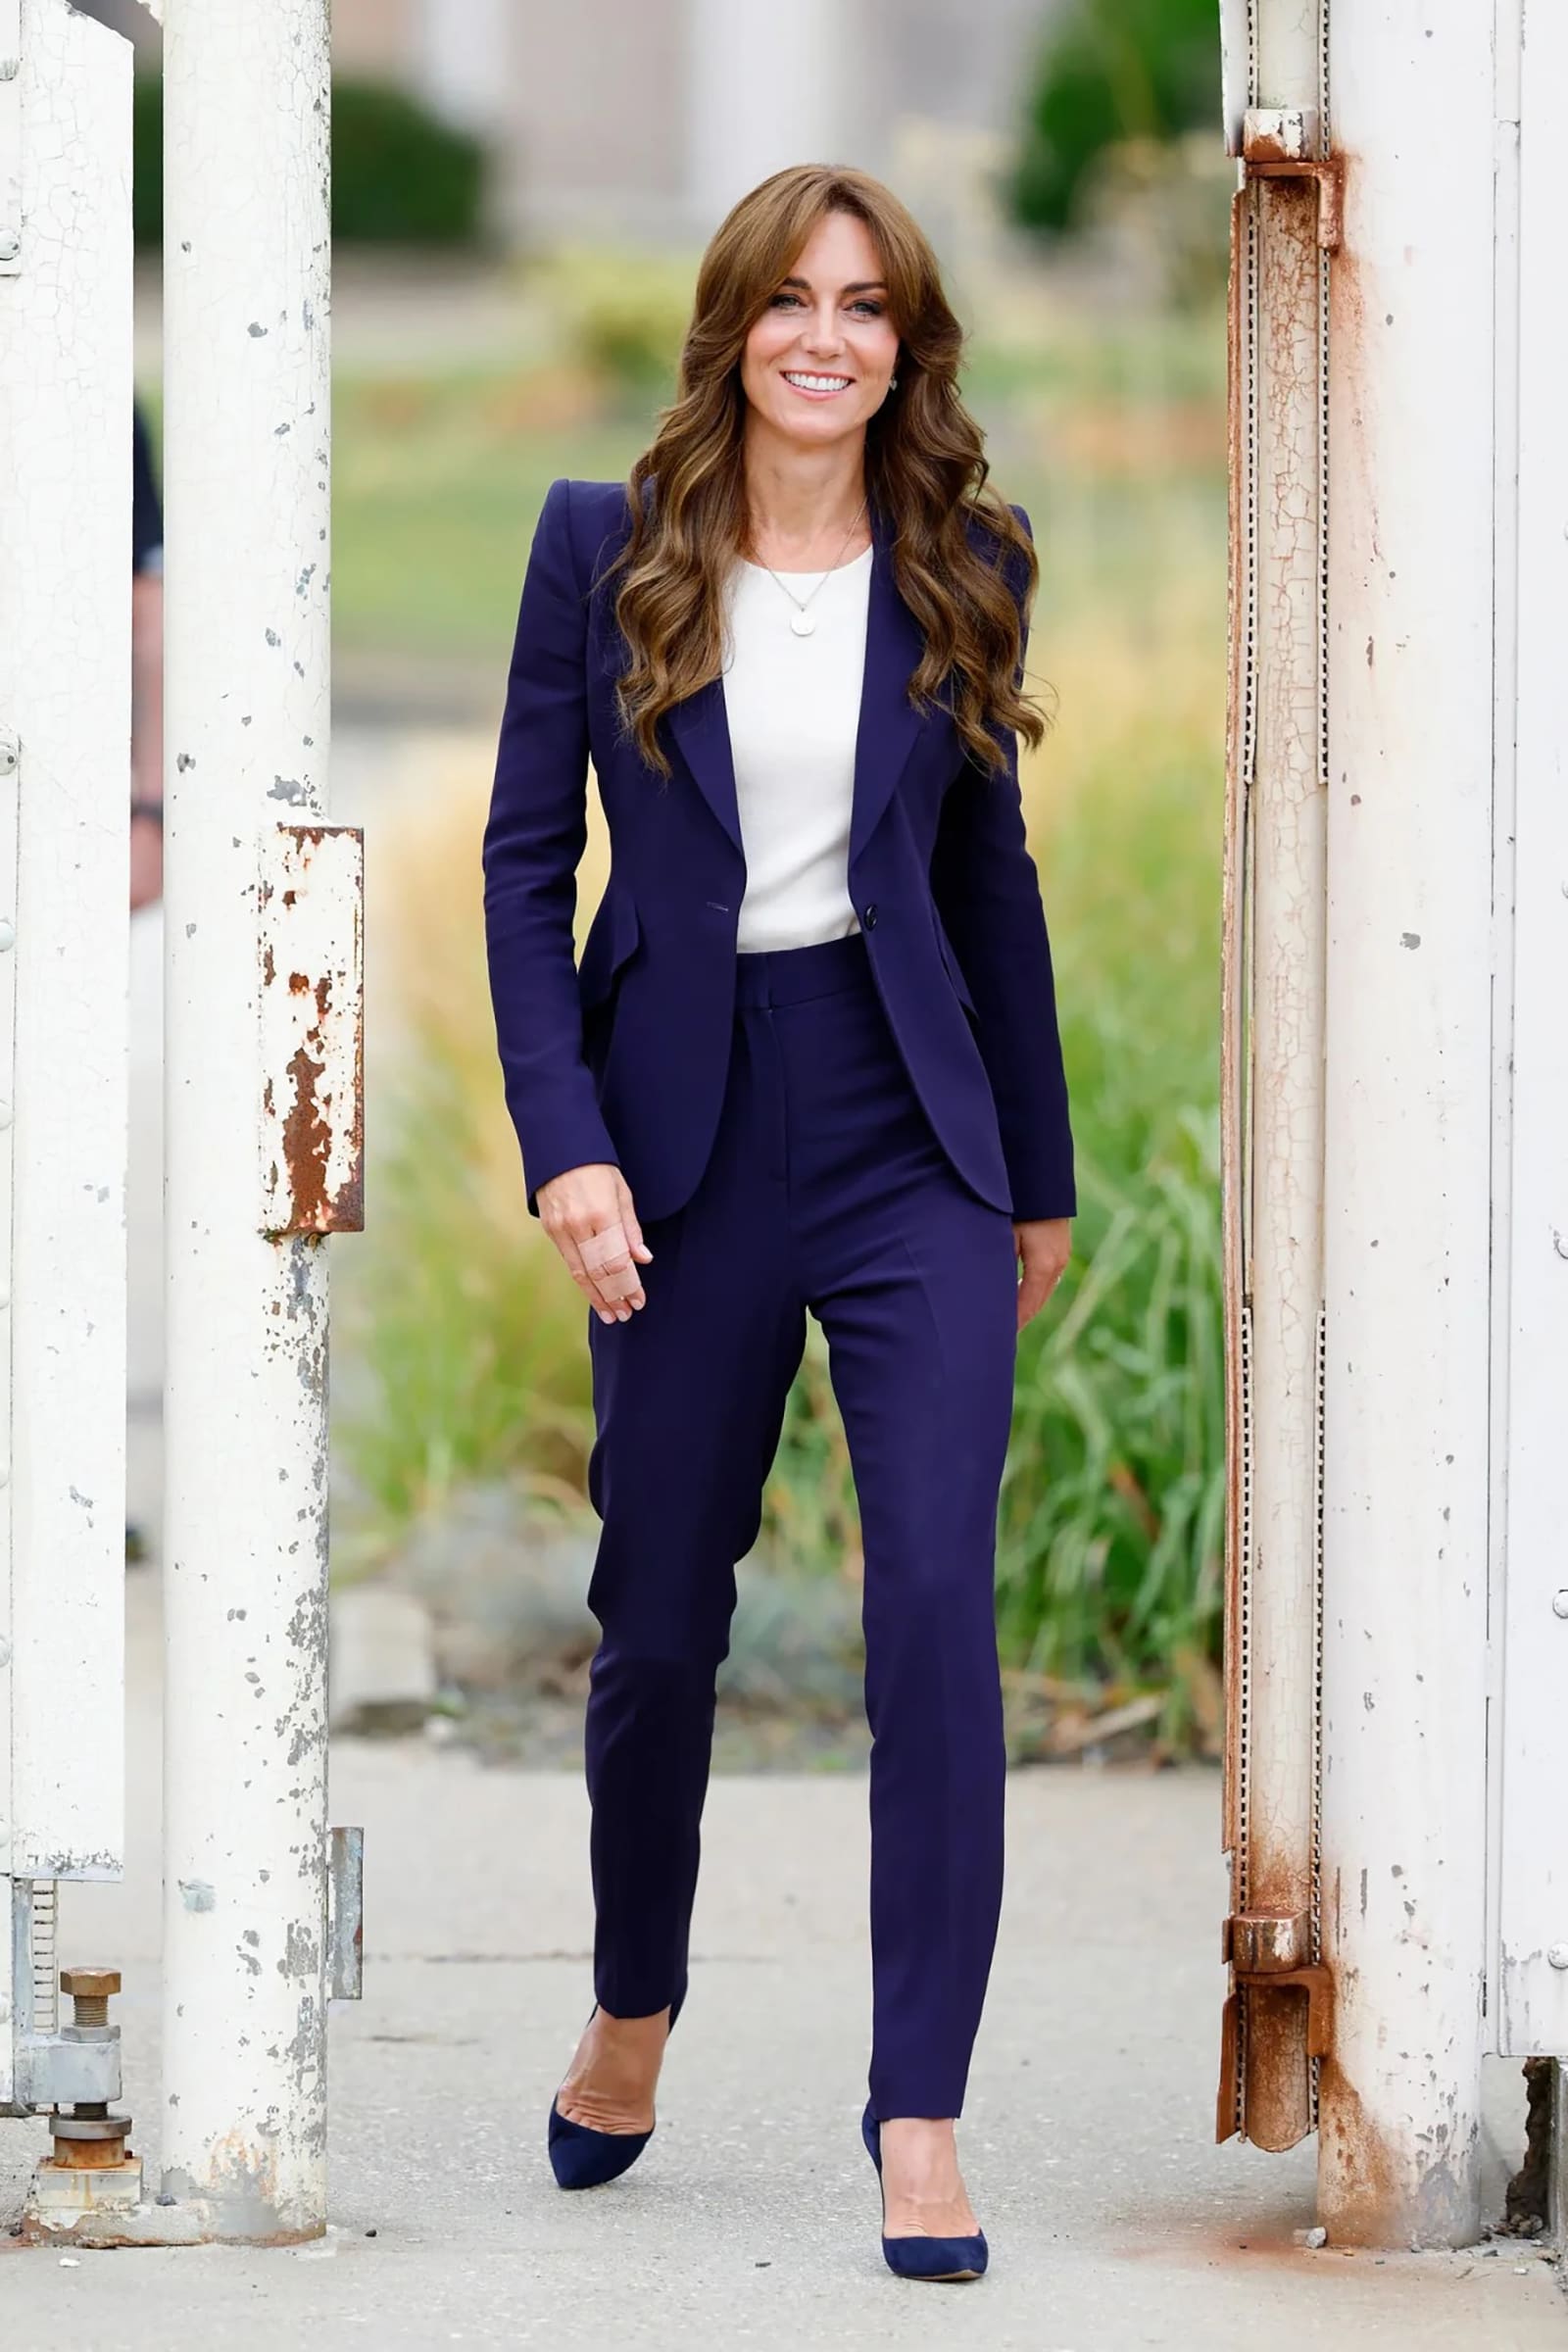 Princess Kate in blue suit and pants